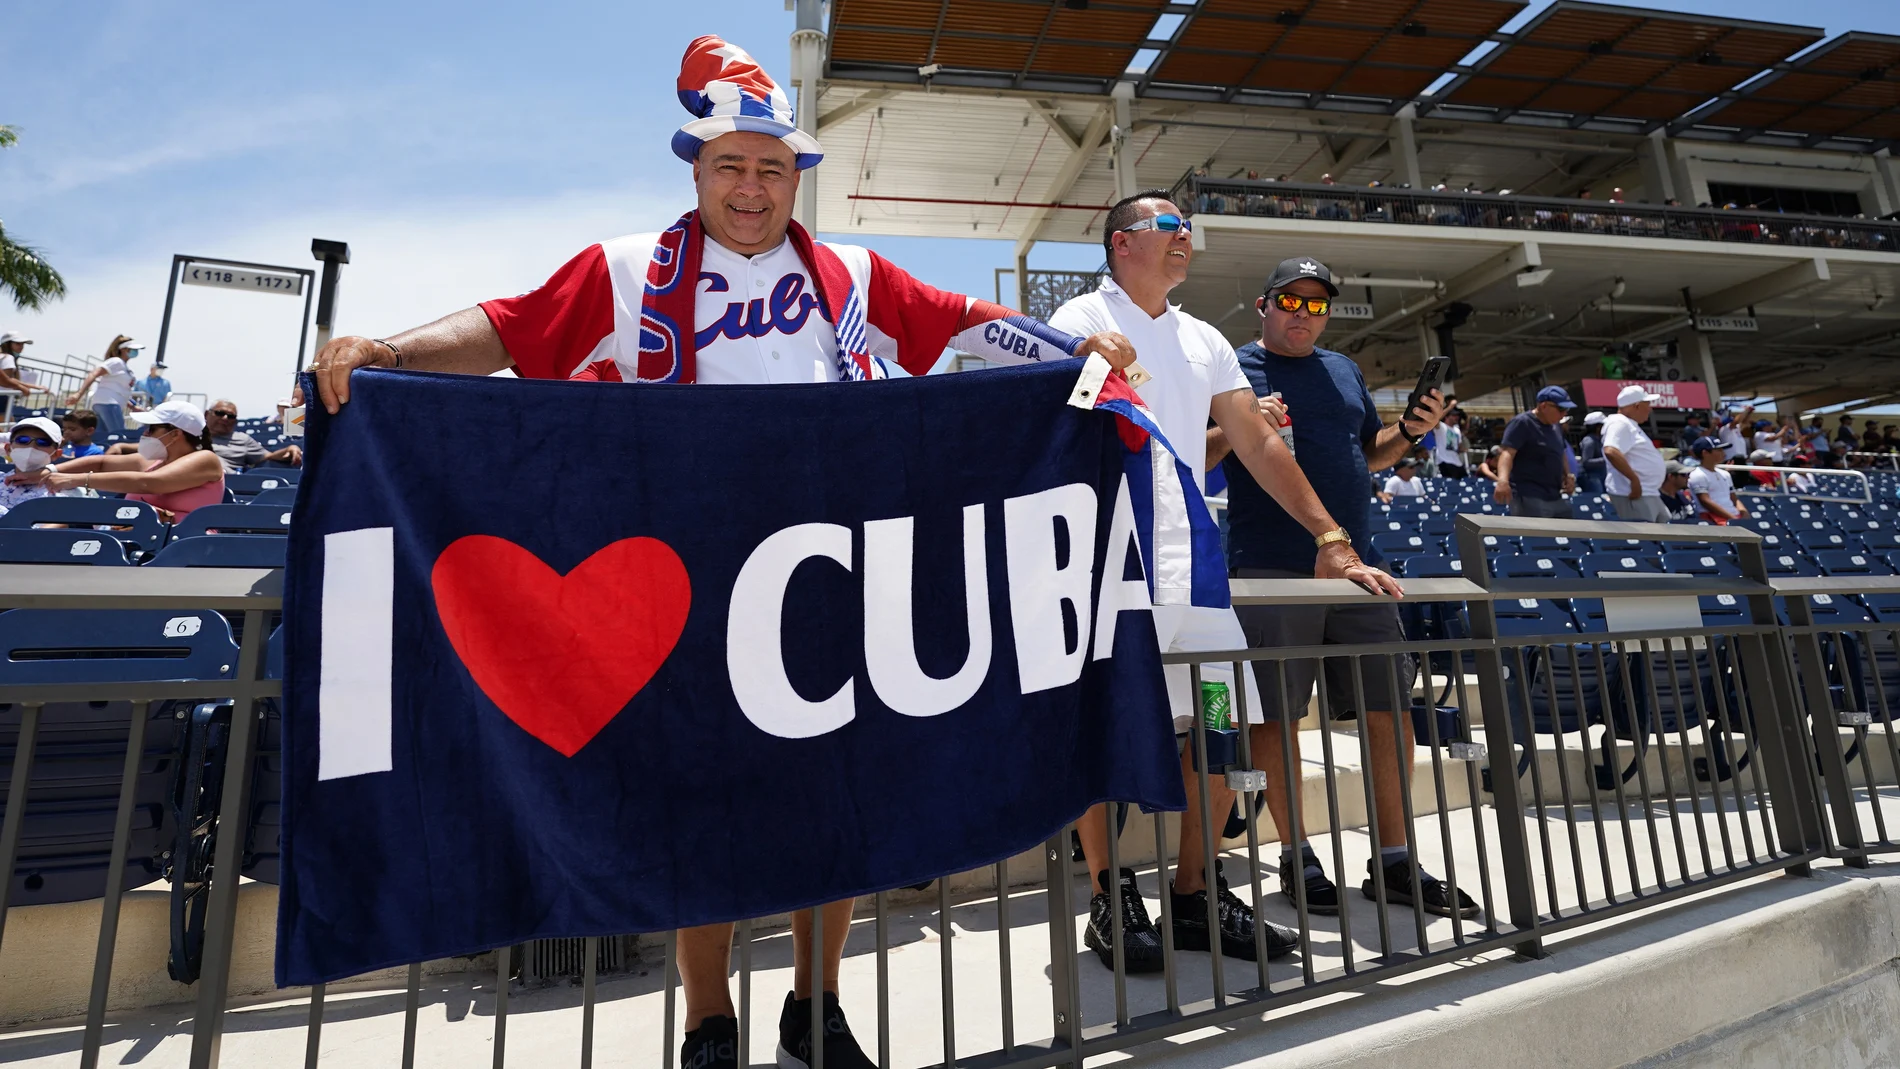 May 31, 2021; West Palm Beach, Florida, USA; A fan of the Cuban team holds a flag during the WBSC Baseball Americas Qualifier series of baseball games between Cuba and Venezuela at The Ballpark of the Palm Beaches. Mandatory Credit: Jasen Vinlove-USA TODAY Sports